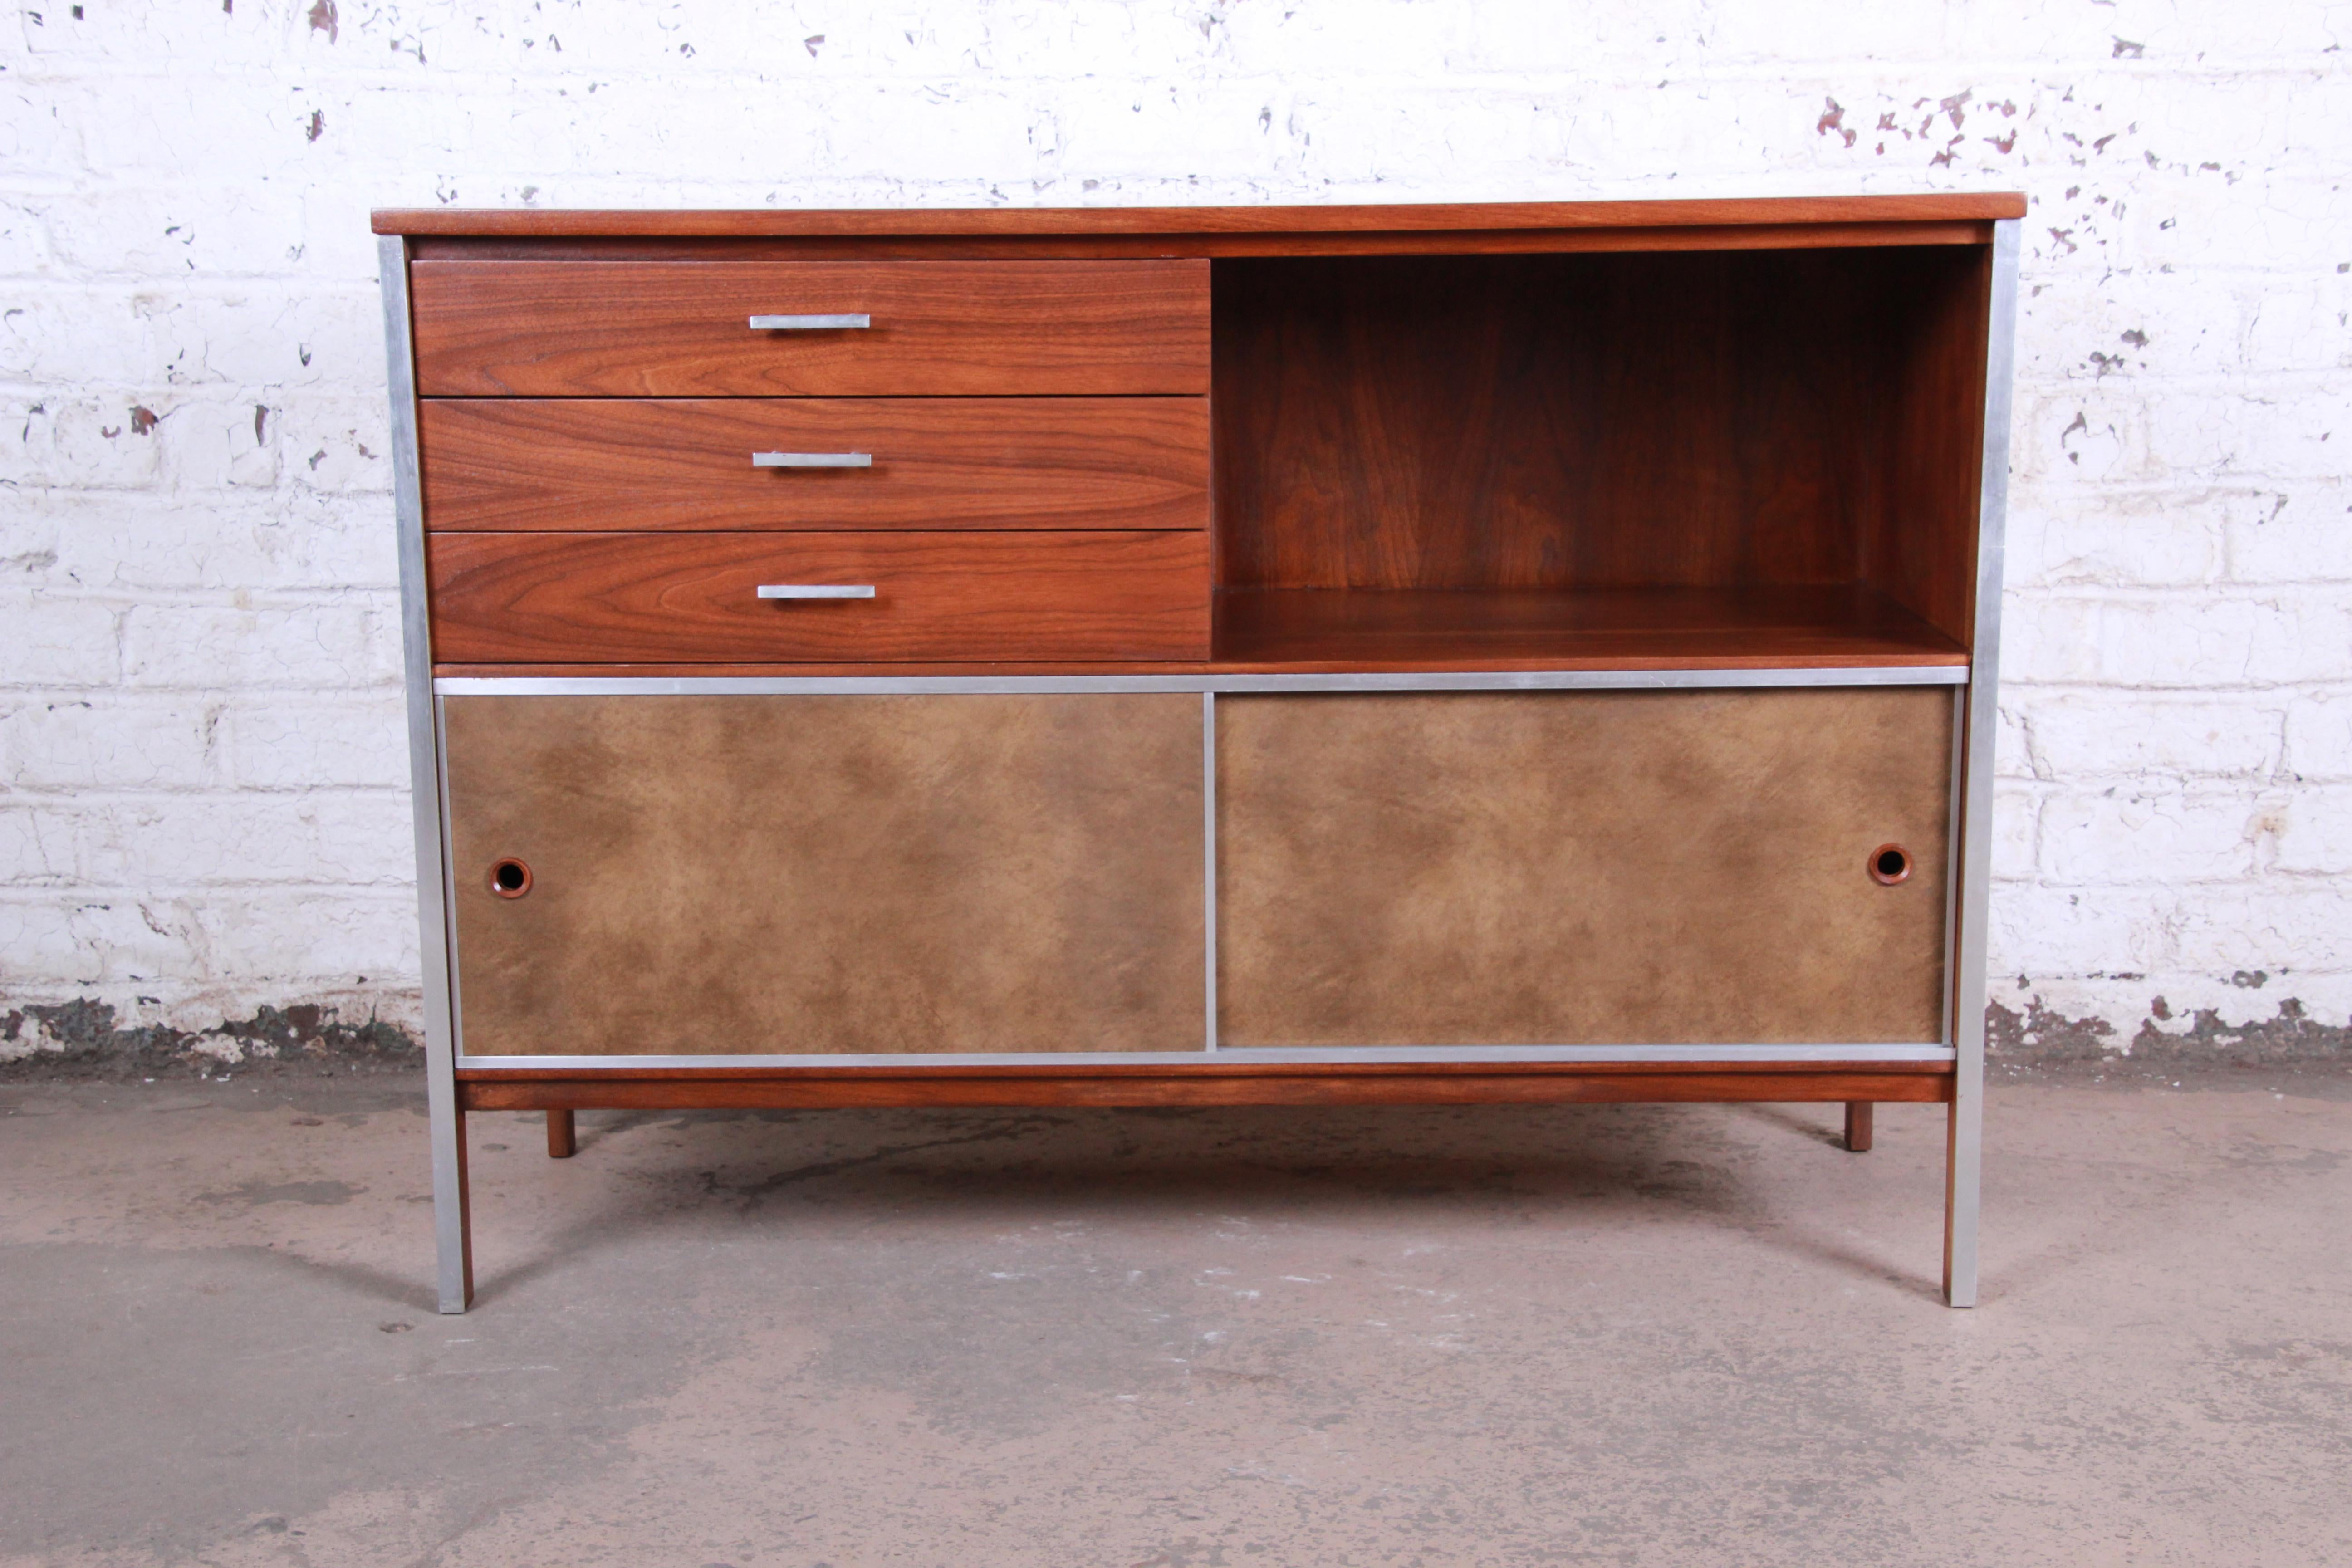 An exceptional Mid-Century Modern credenza or media cabinet designed by Paul McCobb for his Linear Group line for Calvin Furniture. The credenza features stunning walnut wood grain with aluminum trim and hardware. It offers great storage, with three